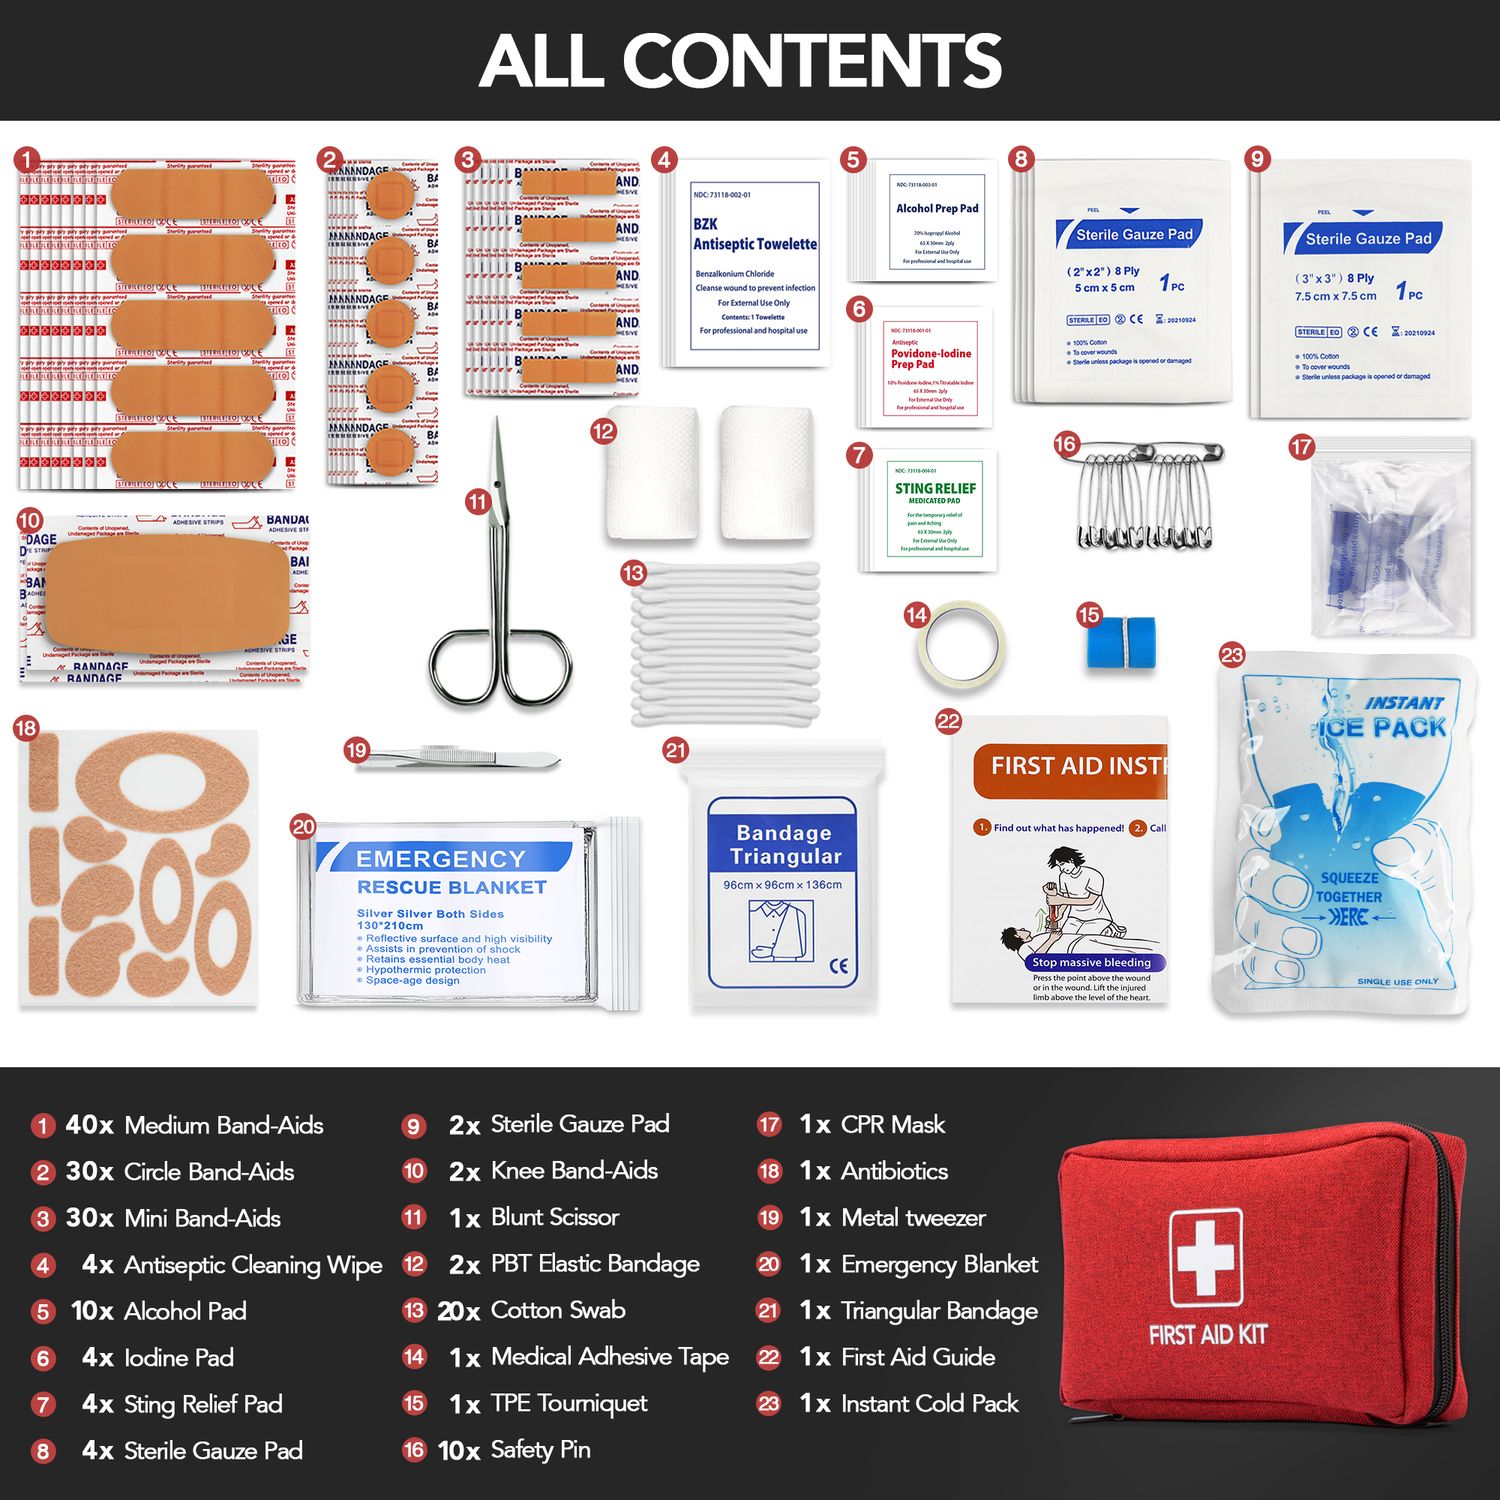 Portable Medical First Aid Kit content list